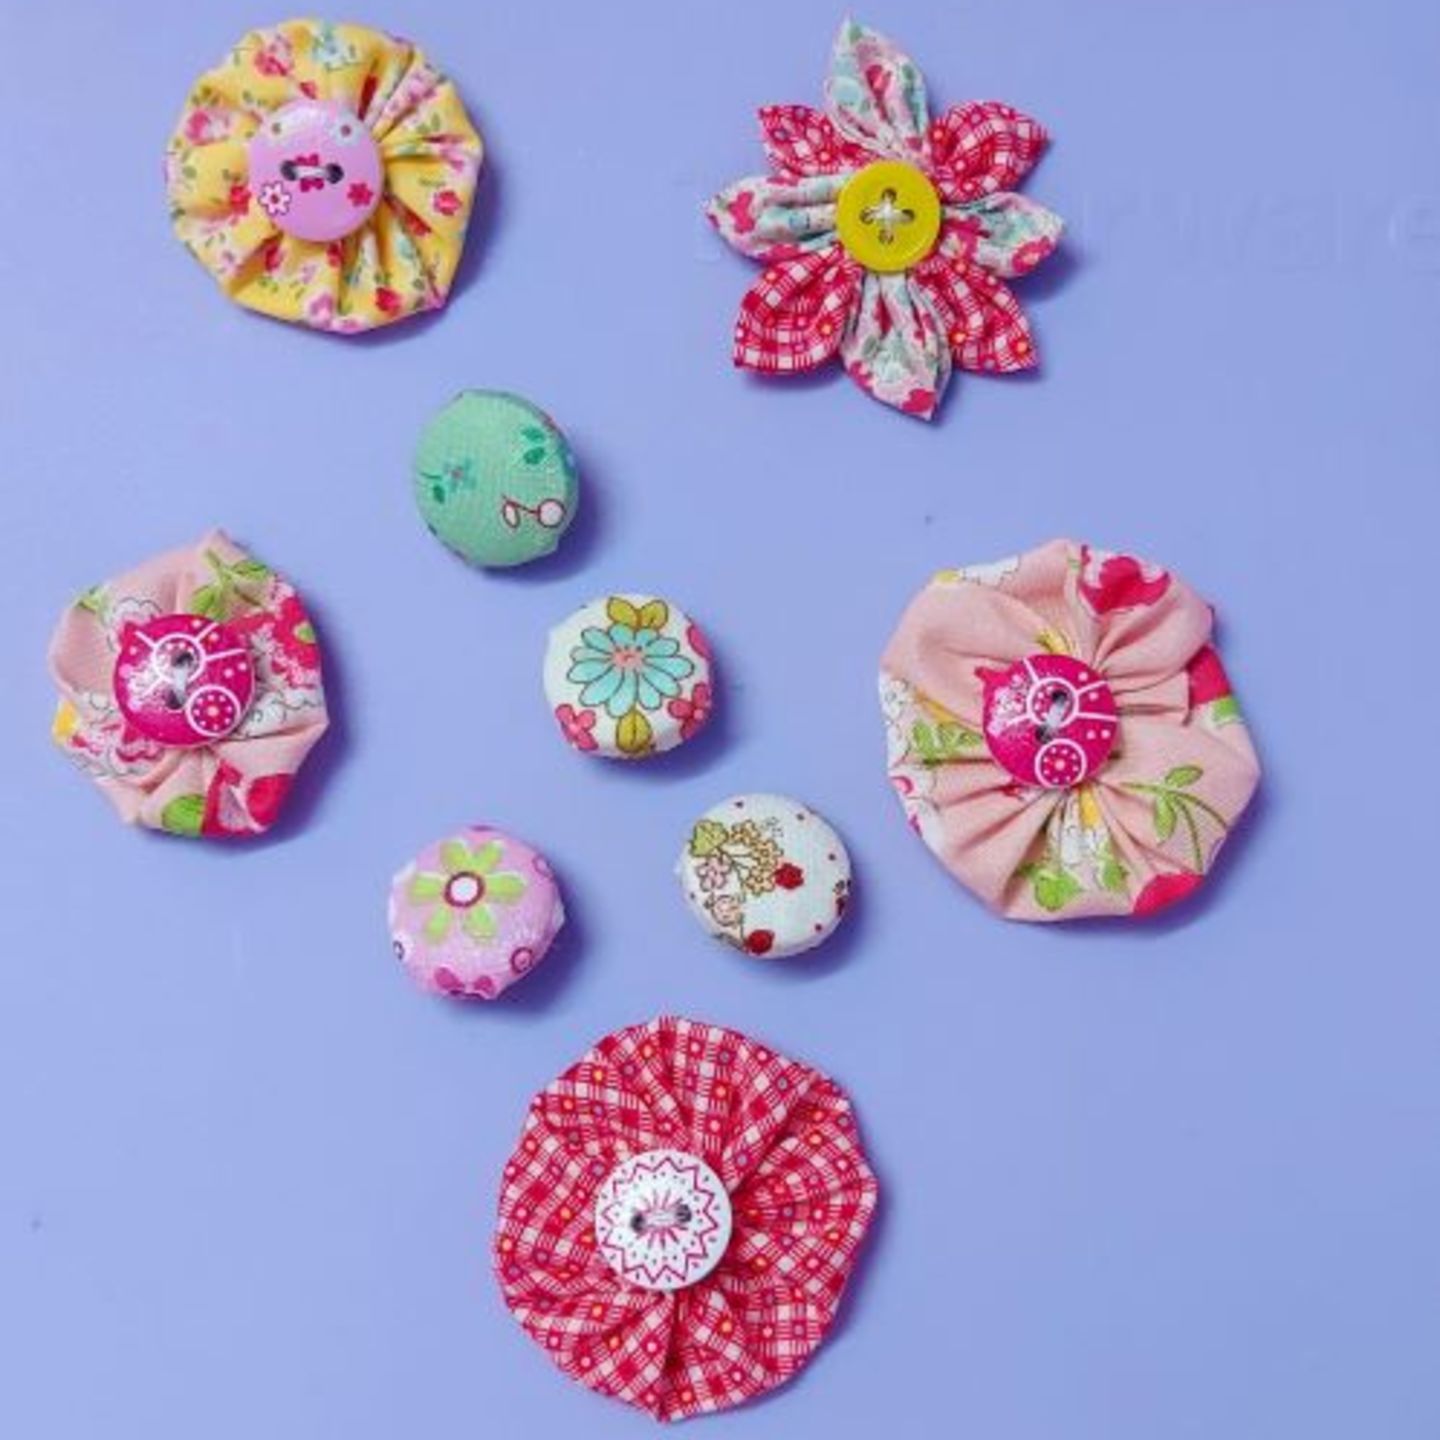 Patchwork Accessories - Buttons , Flowers